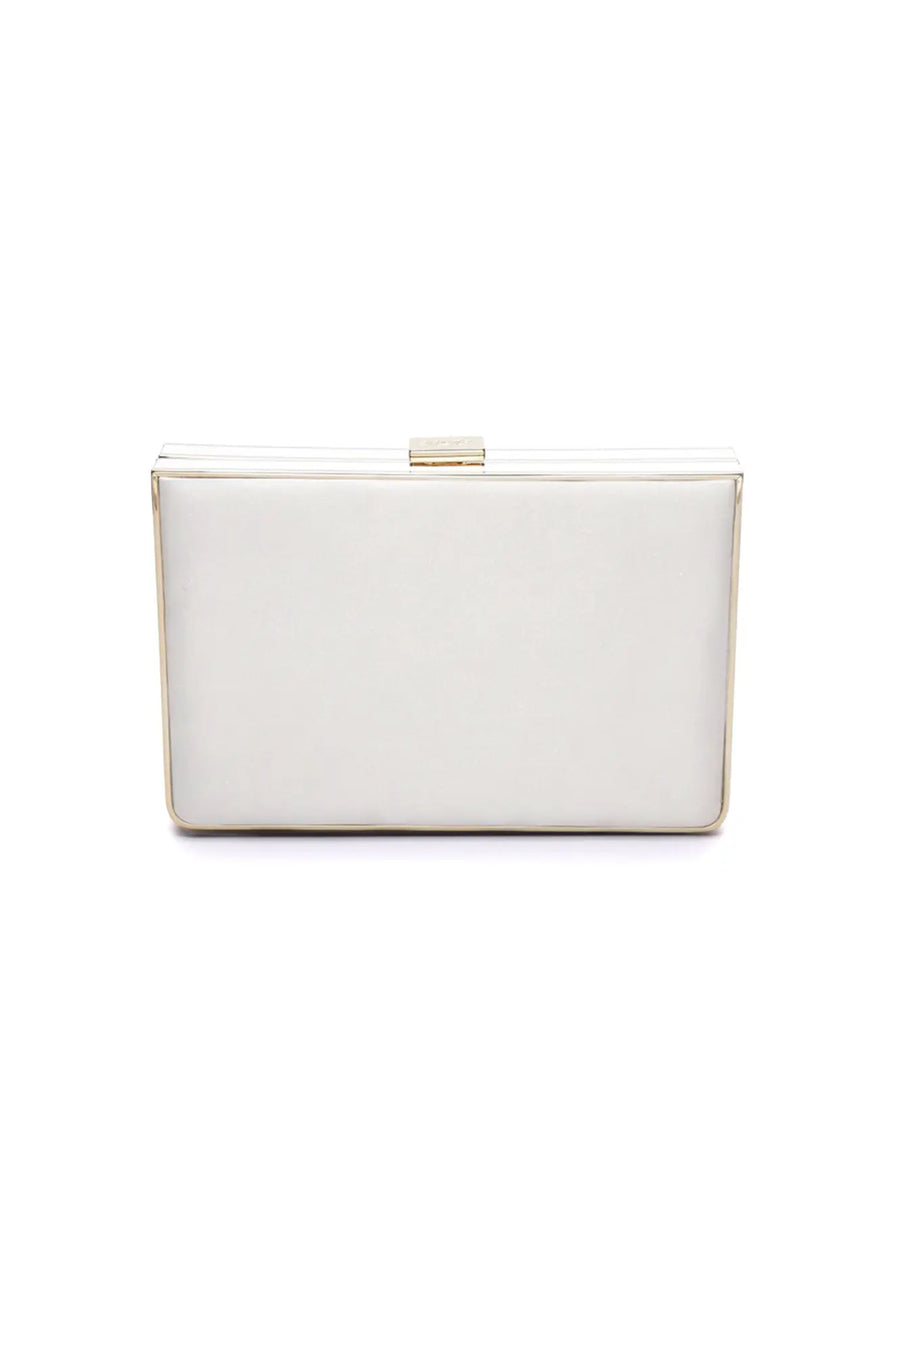 White Venezia clutch with a gold-tone frame and clasp, perfect as a luxury evening accessory from The Bella Rosa Collection.